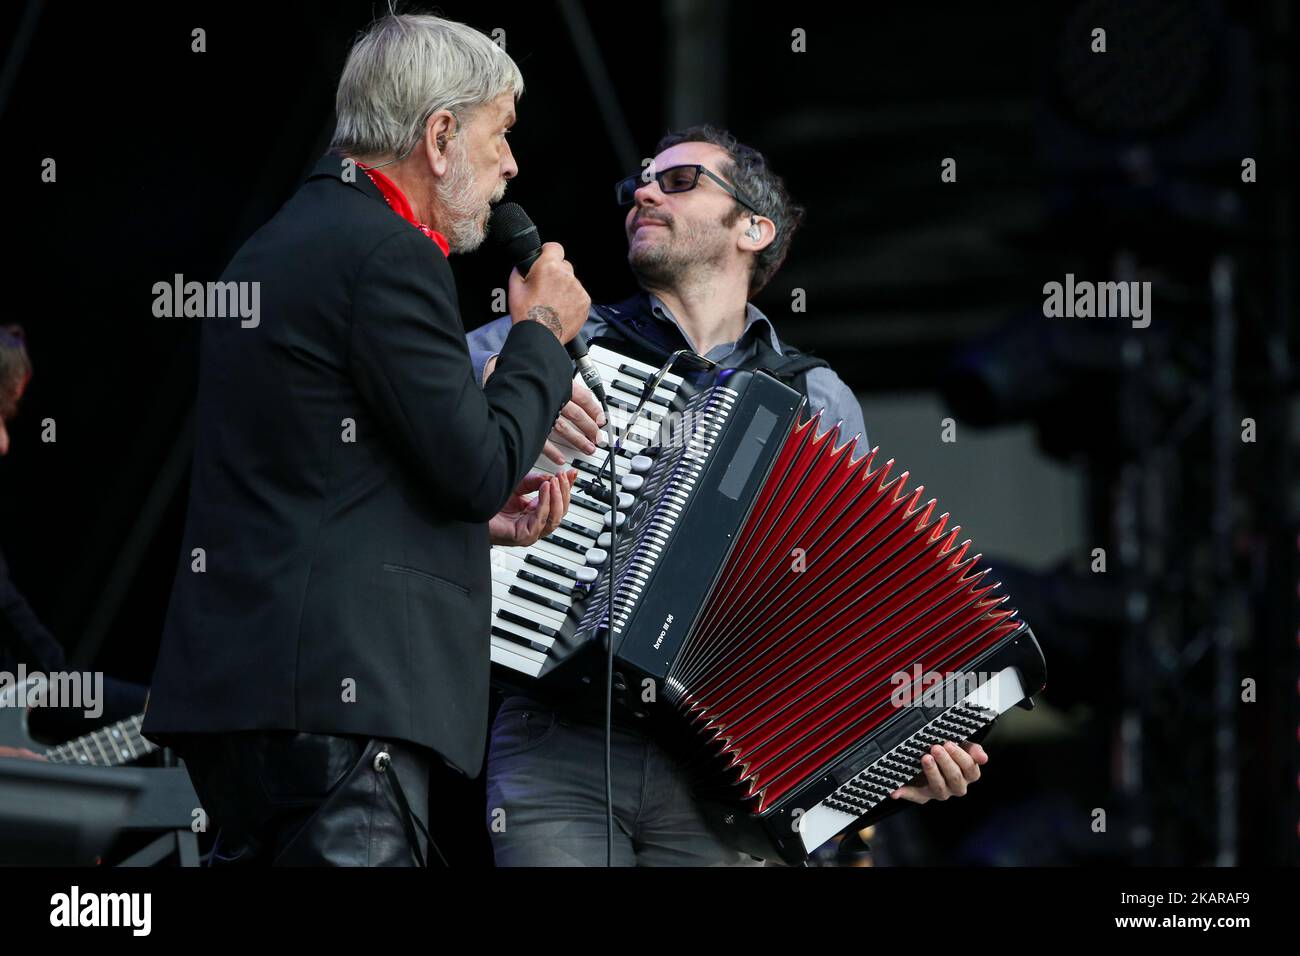 Singer Renaud performs during the Festival of Humanity (Fete de l'Humanite), a political event and music festival organized by the French Communist party (PCF) on September 17, 2017 in La Courneuve, outside Paris, France. (Photo by Michel Stoupak/NurPhoto) Stock Photo